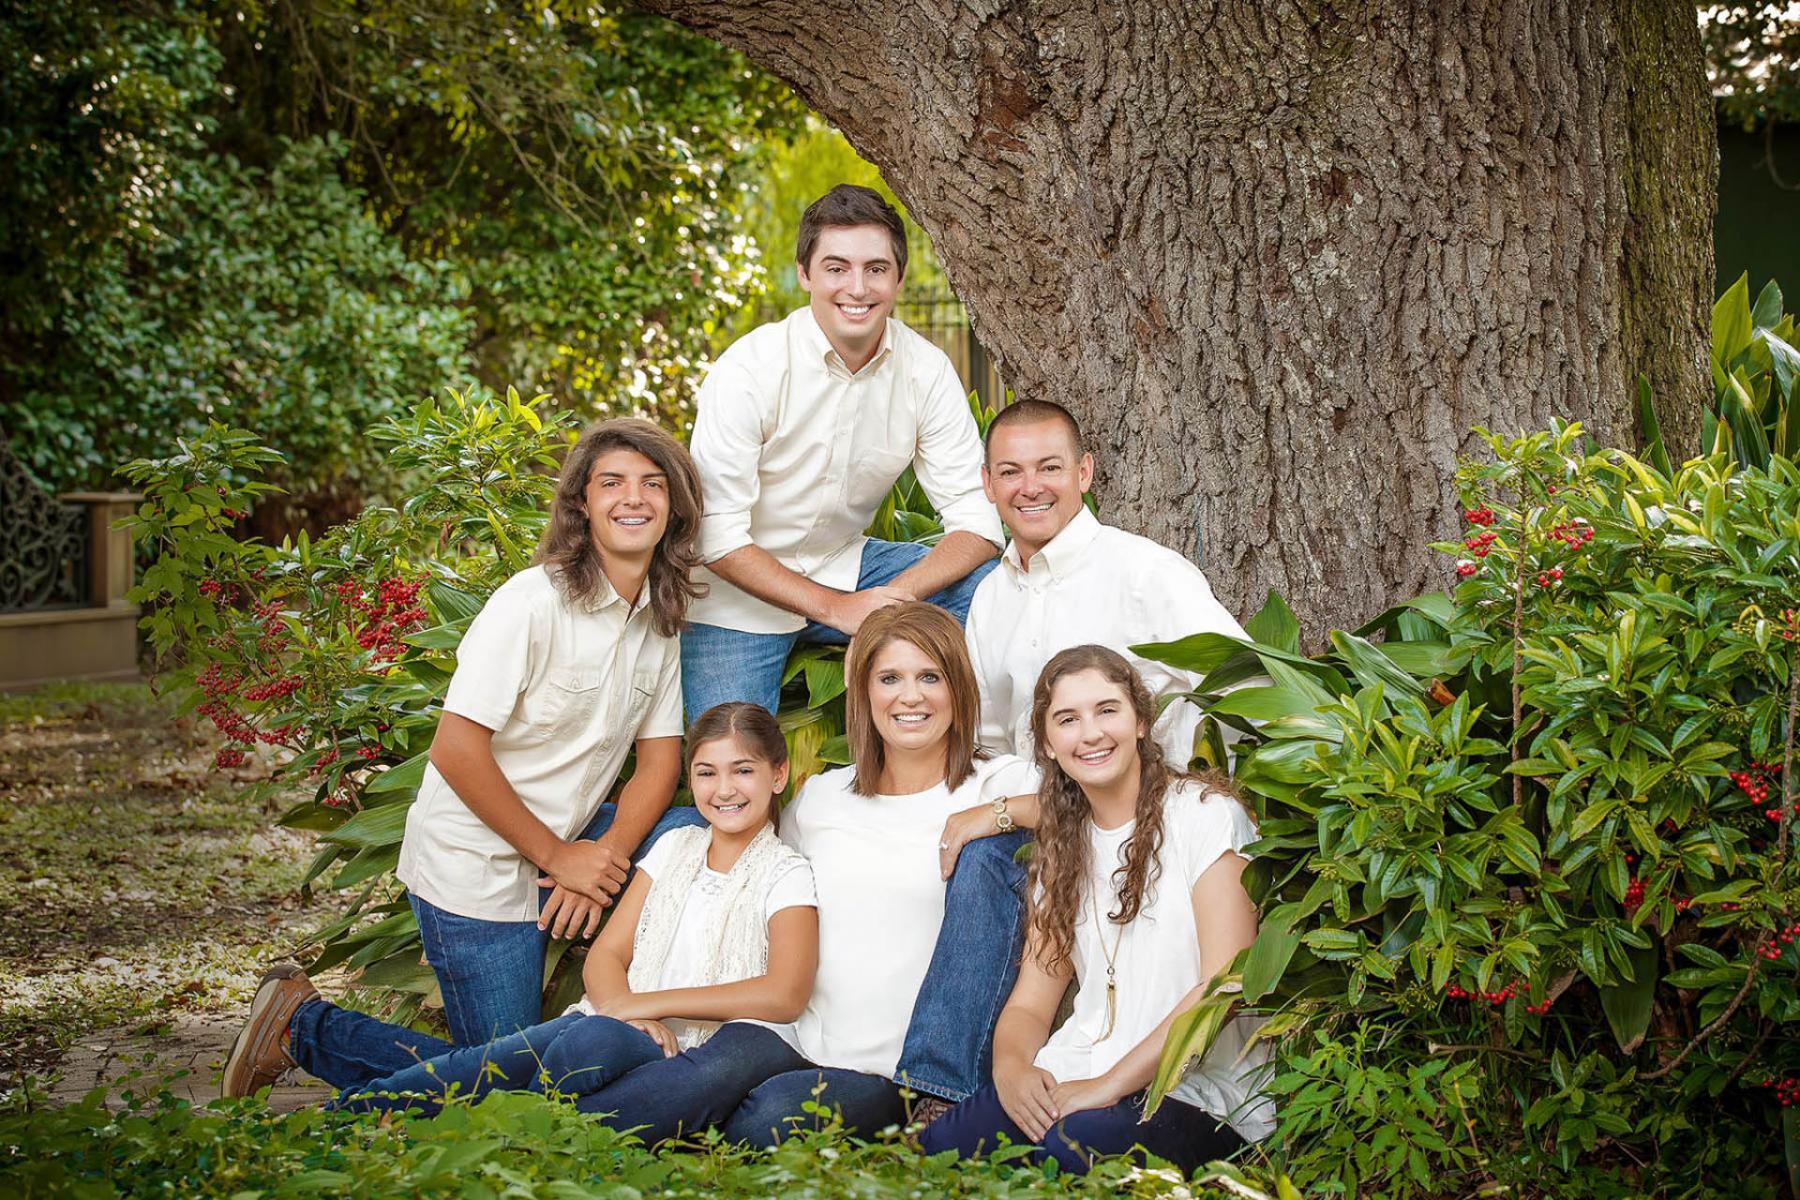 Family pictures are the corner stone of experienced professional photography. The Lighting and the style are what we dob use. Our goal is to create an image that will be on your wall for many years. We have photographed thousands of families in the Houma, Thibodaux, and Galliano area.